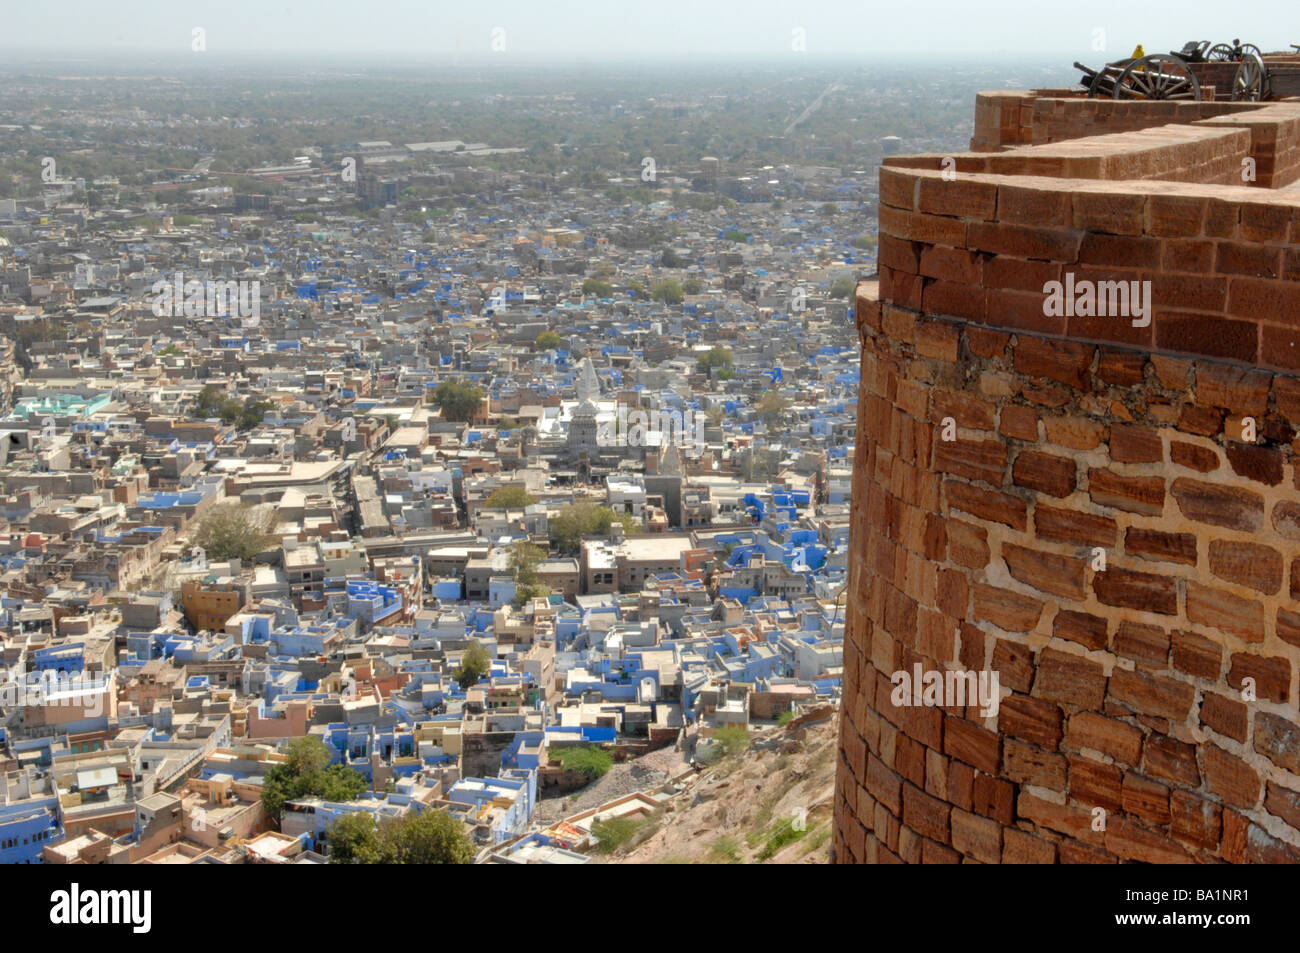 The old city spread out below the Meherengarh Fort in Jodhpur Rajasthan India Stock Photo